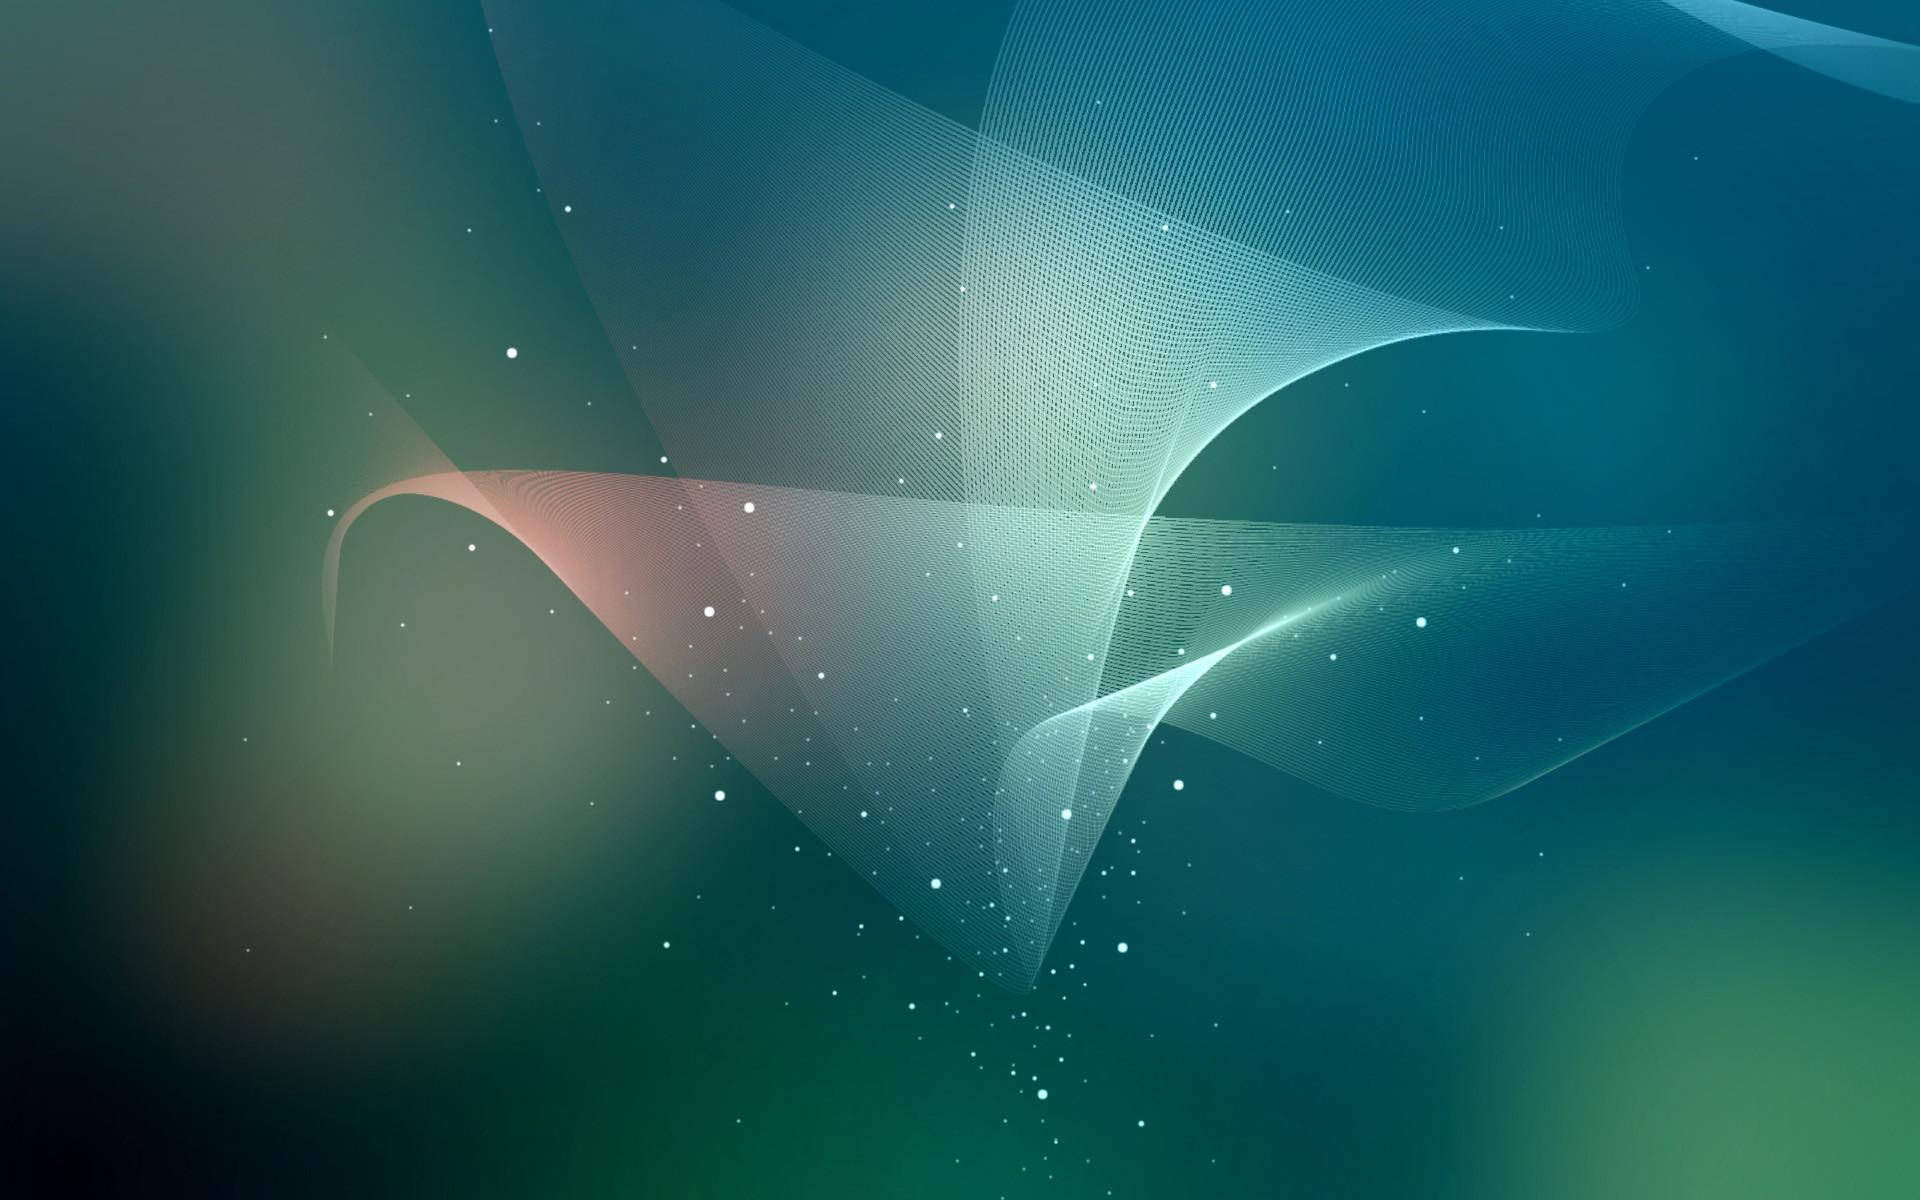 Magical Translucent Fabric Aesthetic Teal Background